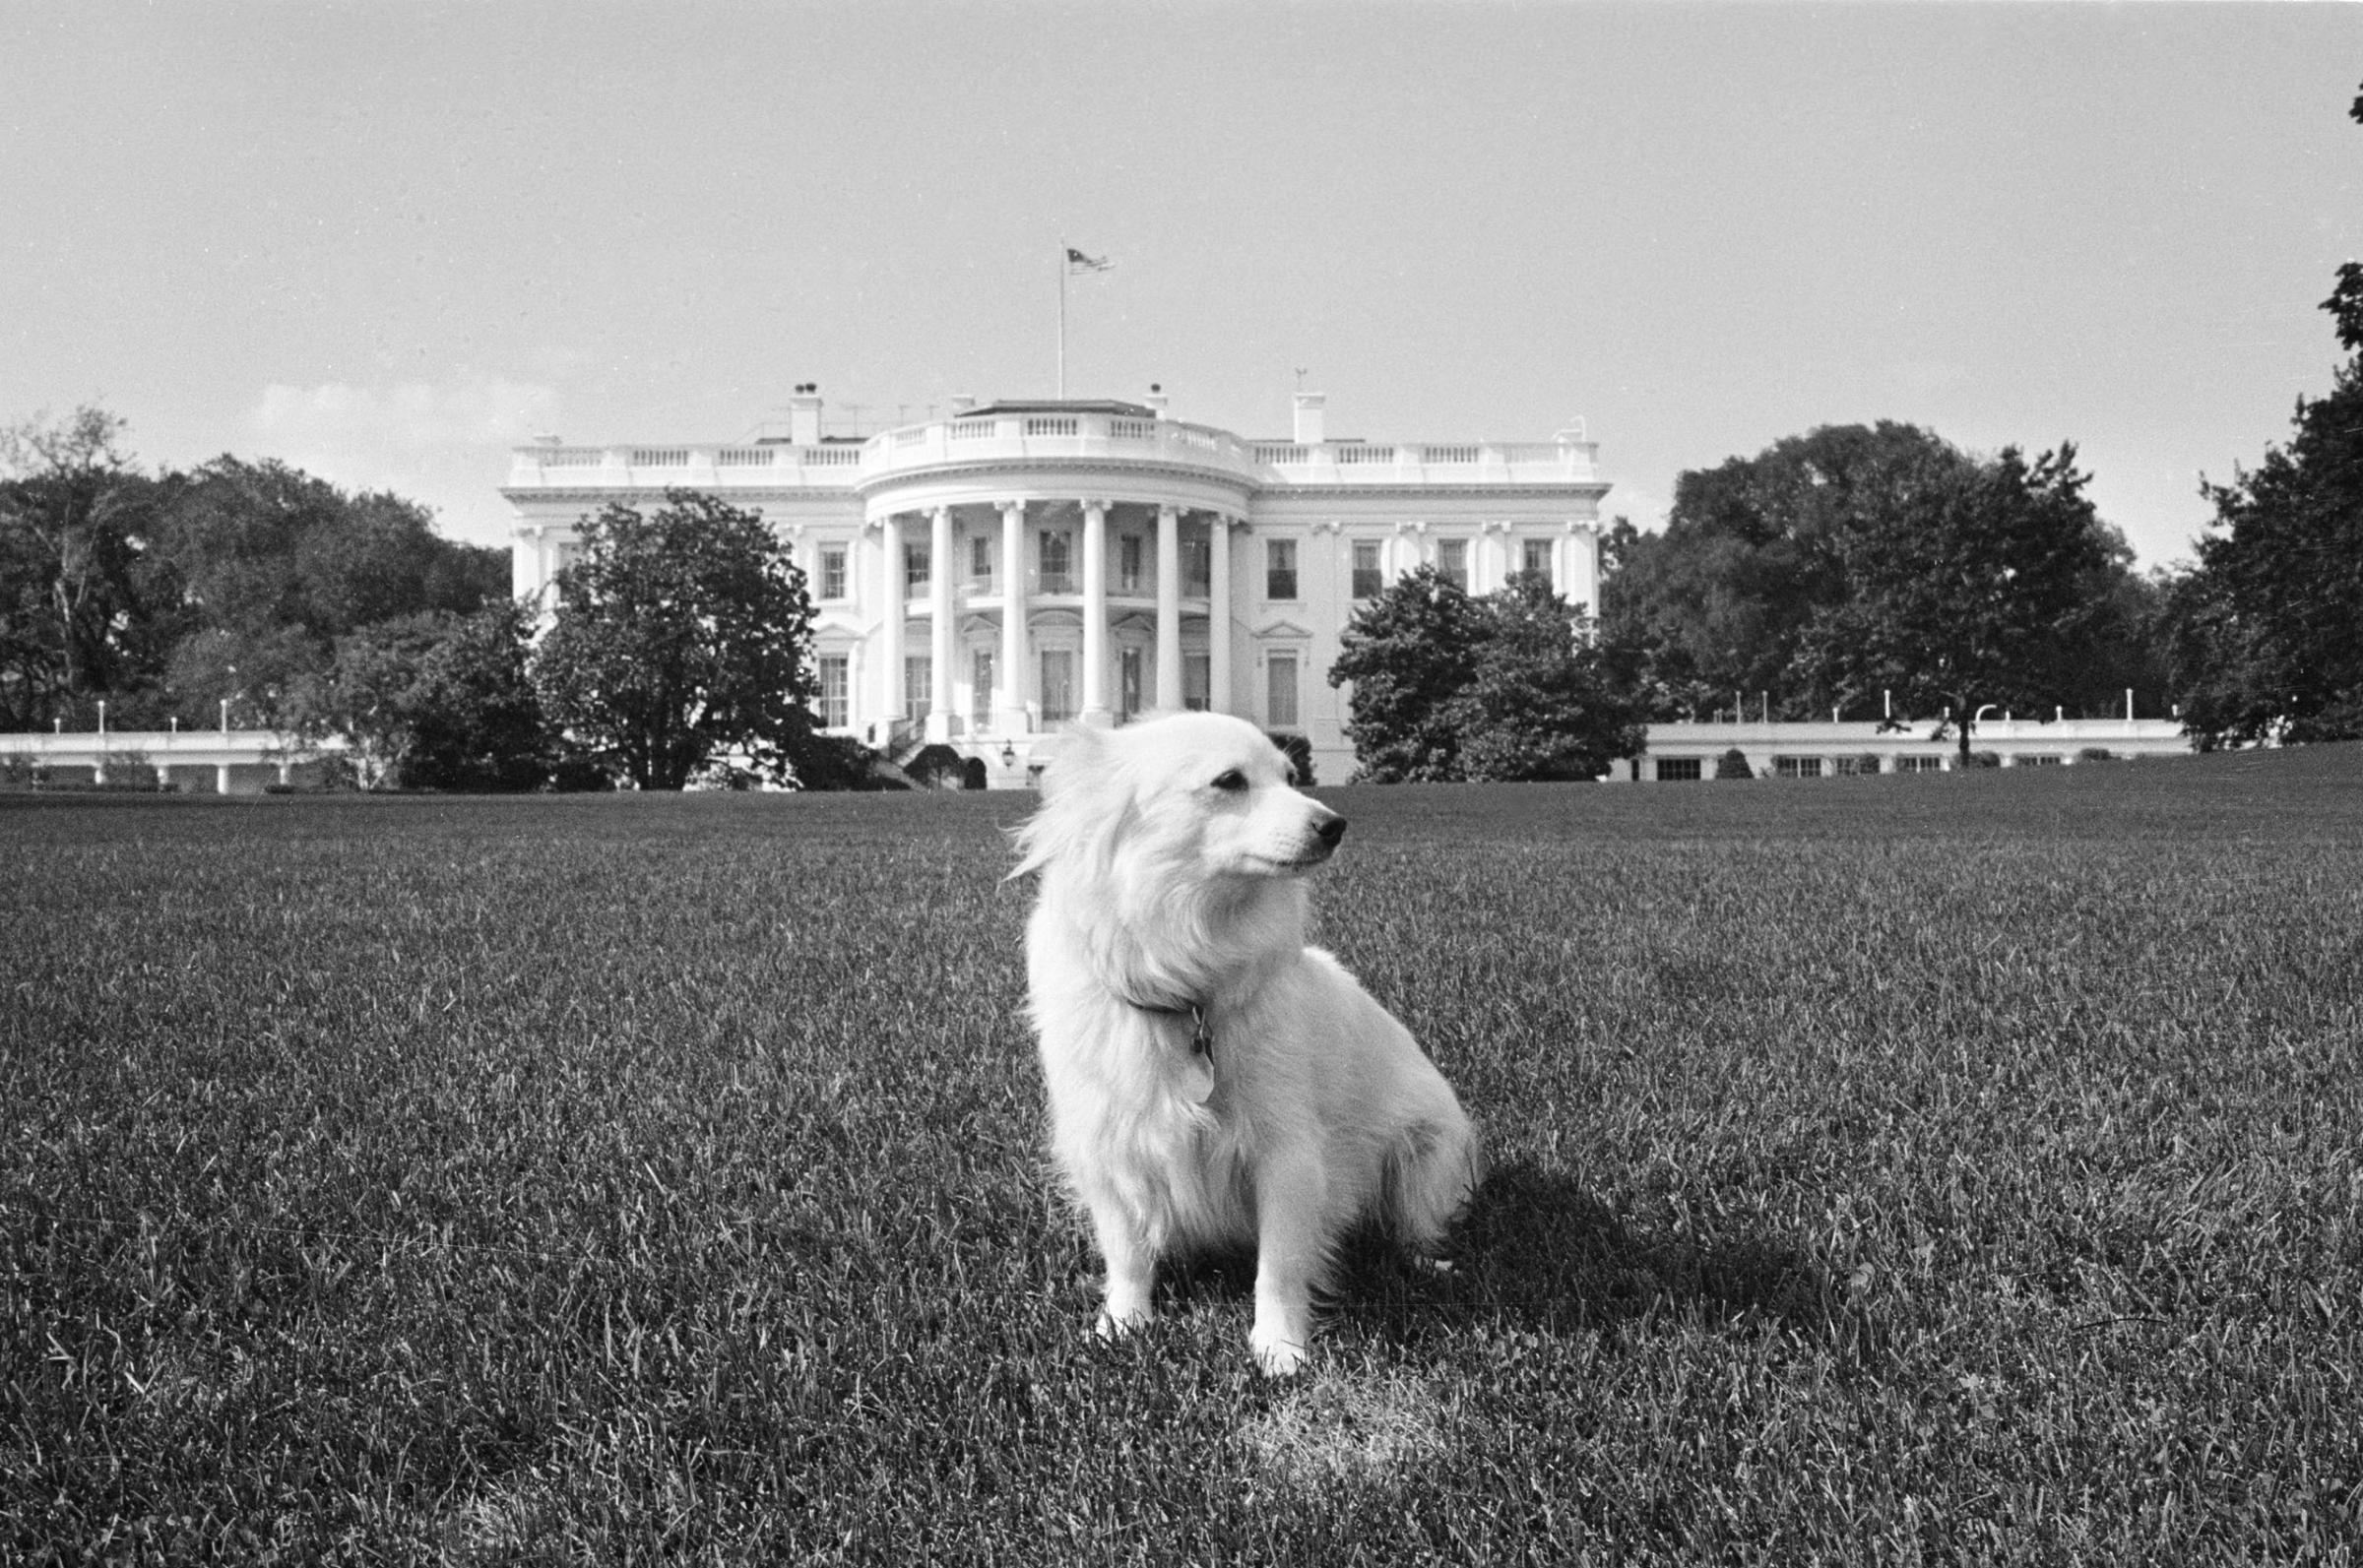 Pushinka, a gift to Presdient John F. Kennedy from Soviet Premier Nikita Khrushchev, stands on the White House lawn, Aug. 14, 1963, while the rest of the family's dogs vacation with the first family at Cape Cod. Pushinka is the offspring of Soviet space dog Stelka.